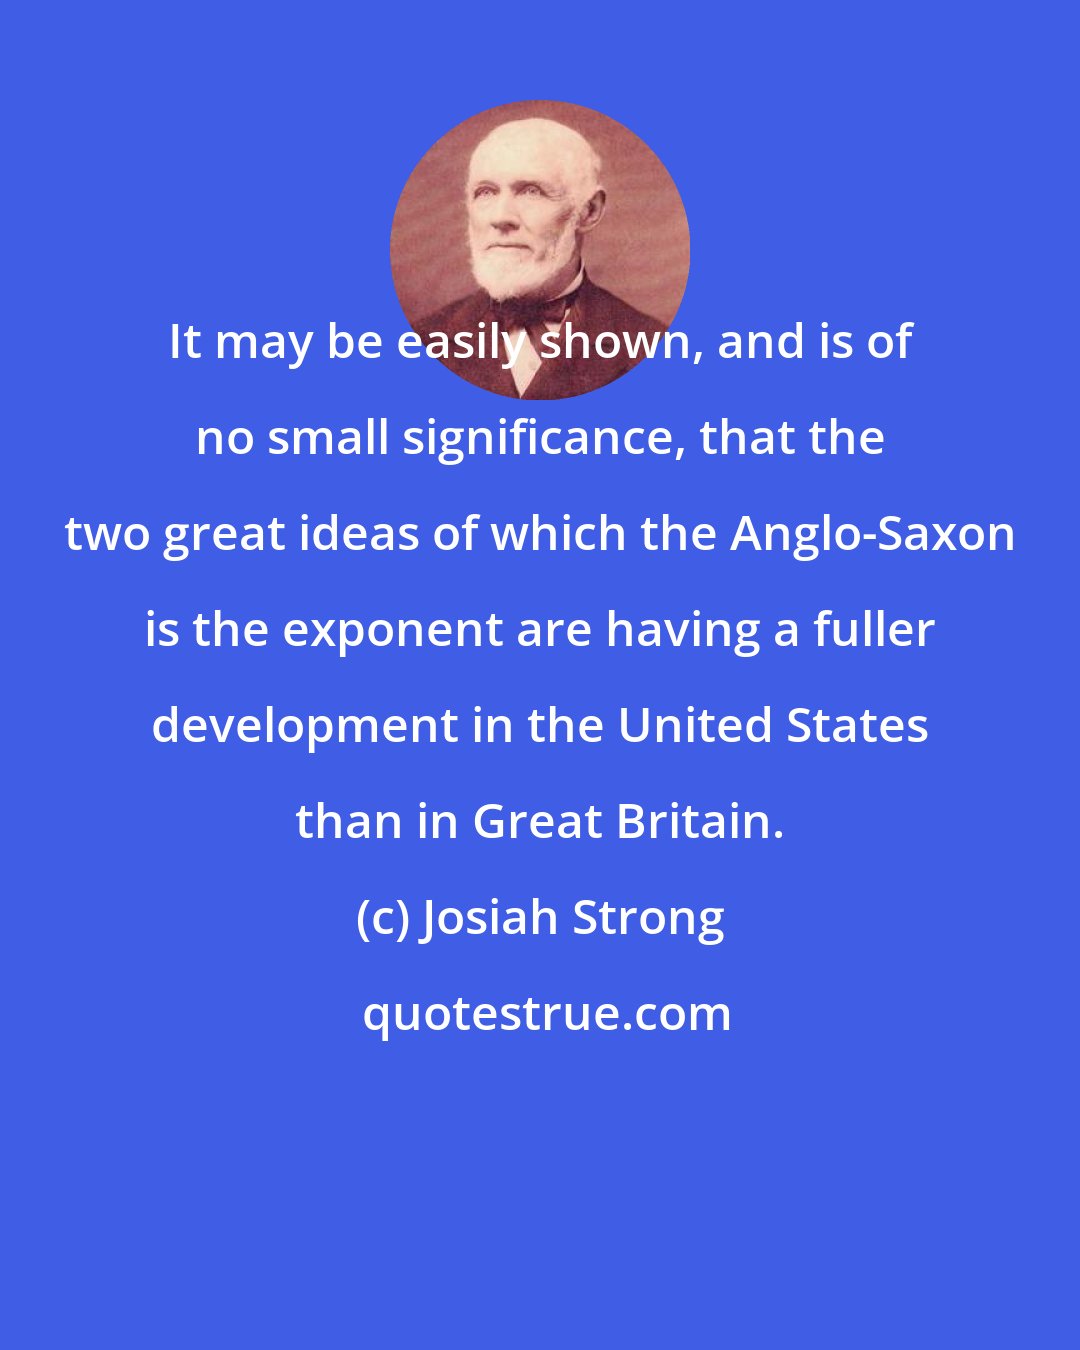 Josiah Strong: It may be easily shown, and is of no small significance, that the two great ideas of which the Anglo-Saxon is the exponent are having a fuller development in the United States than in Great Britain.